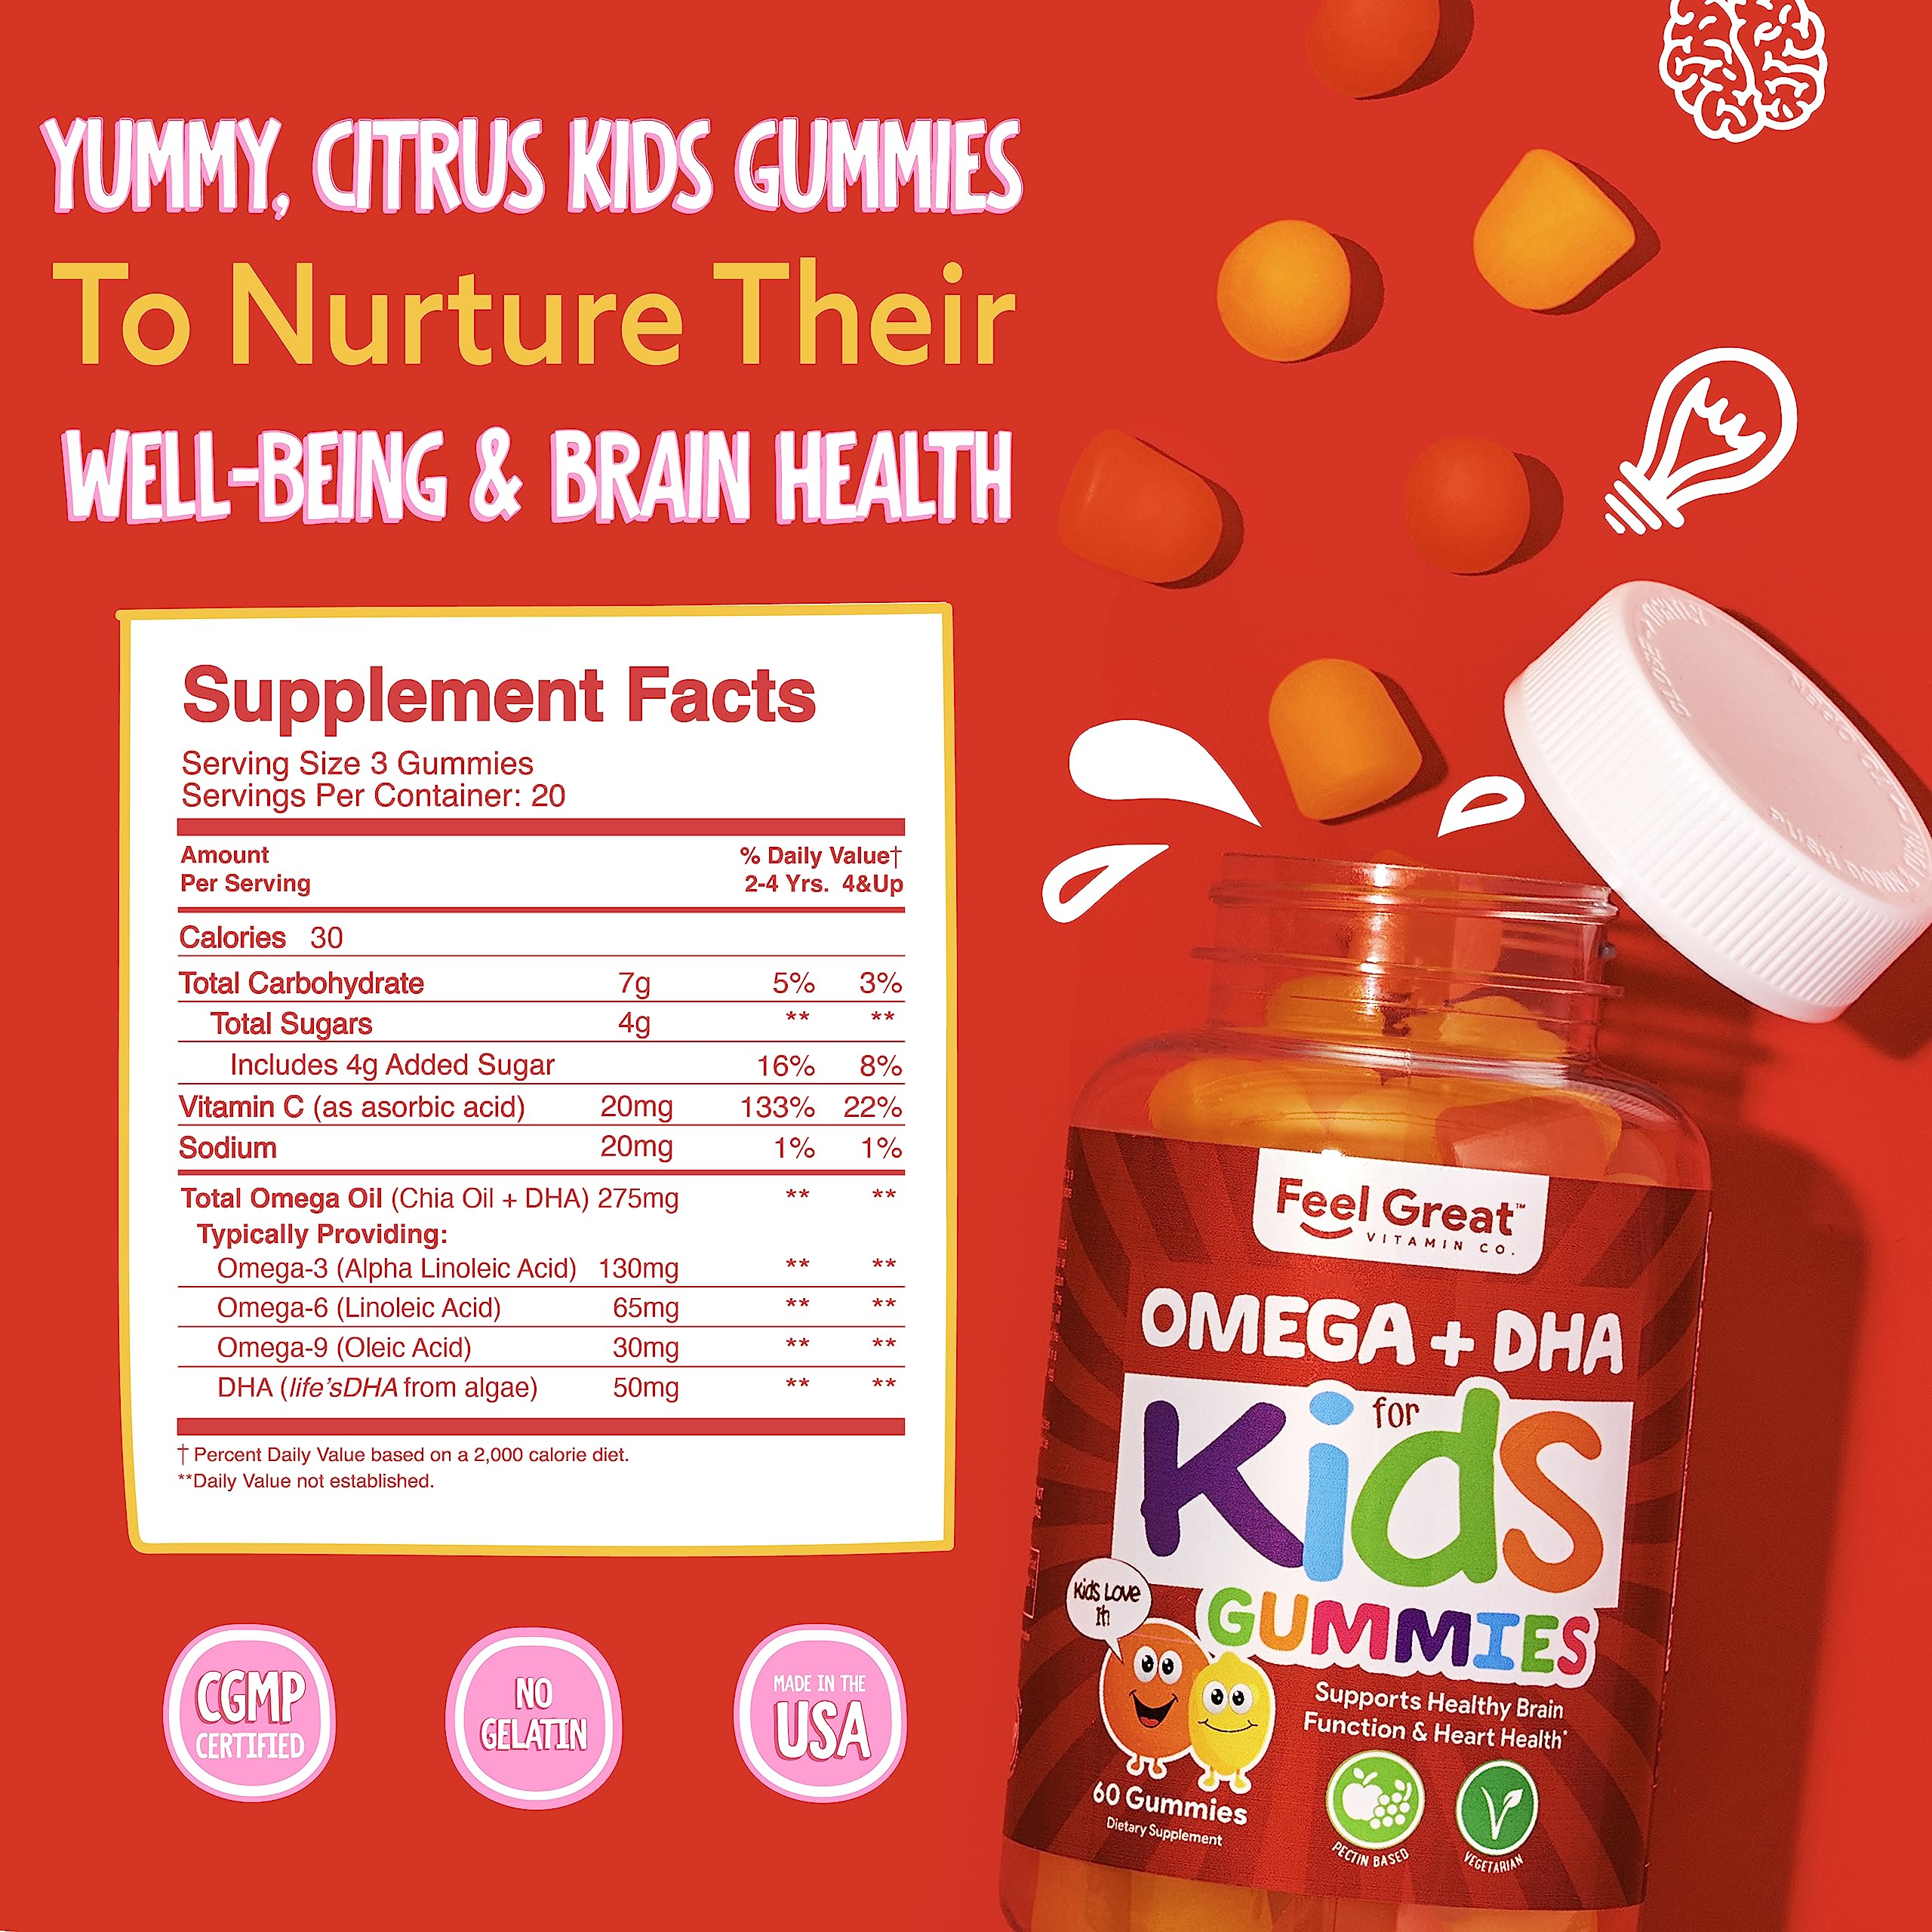 Feel Great Vitamin Co. Complete DHA Gummies for Kids | with Omega 3 6 9 + DHA, Vitamin C | Supports Healthy Brain Function, Vision & Heart Health | Gluten Free, Vegetarian | 60 Gummies